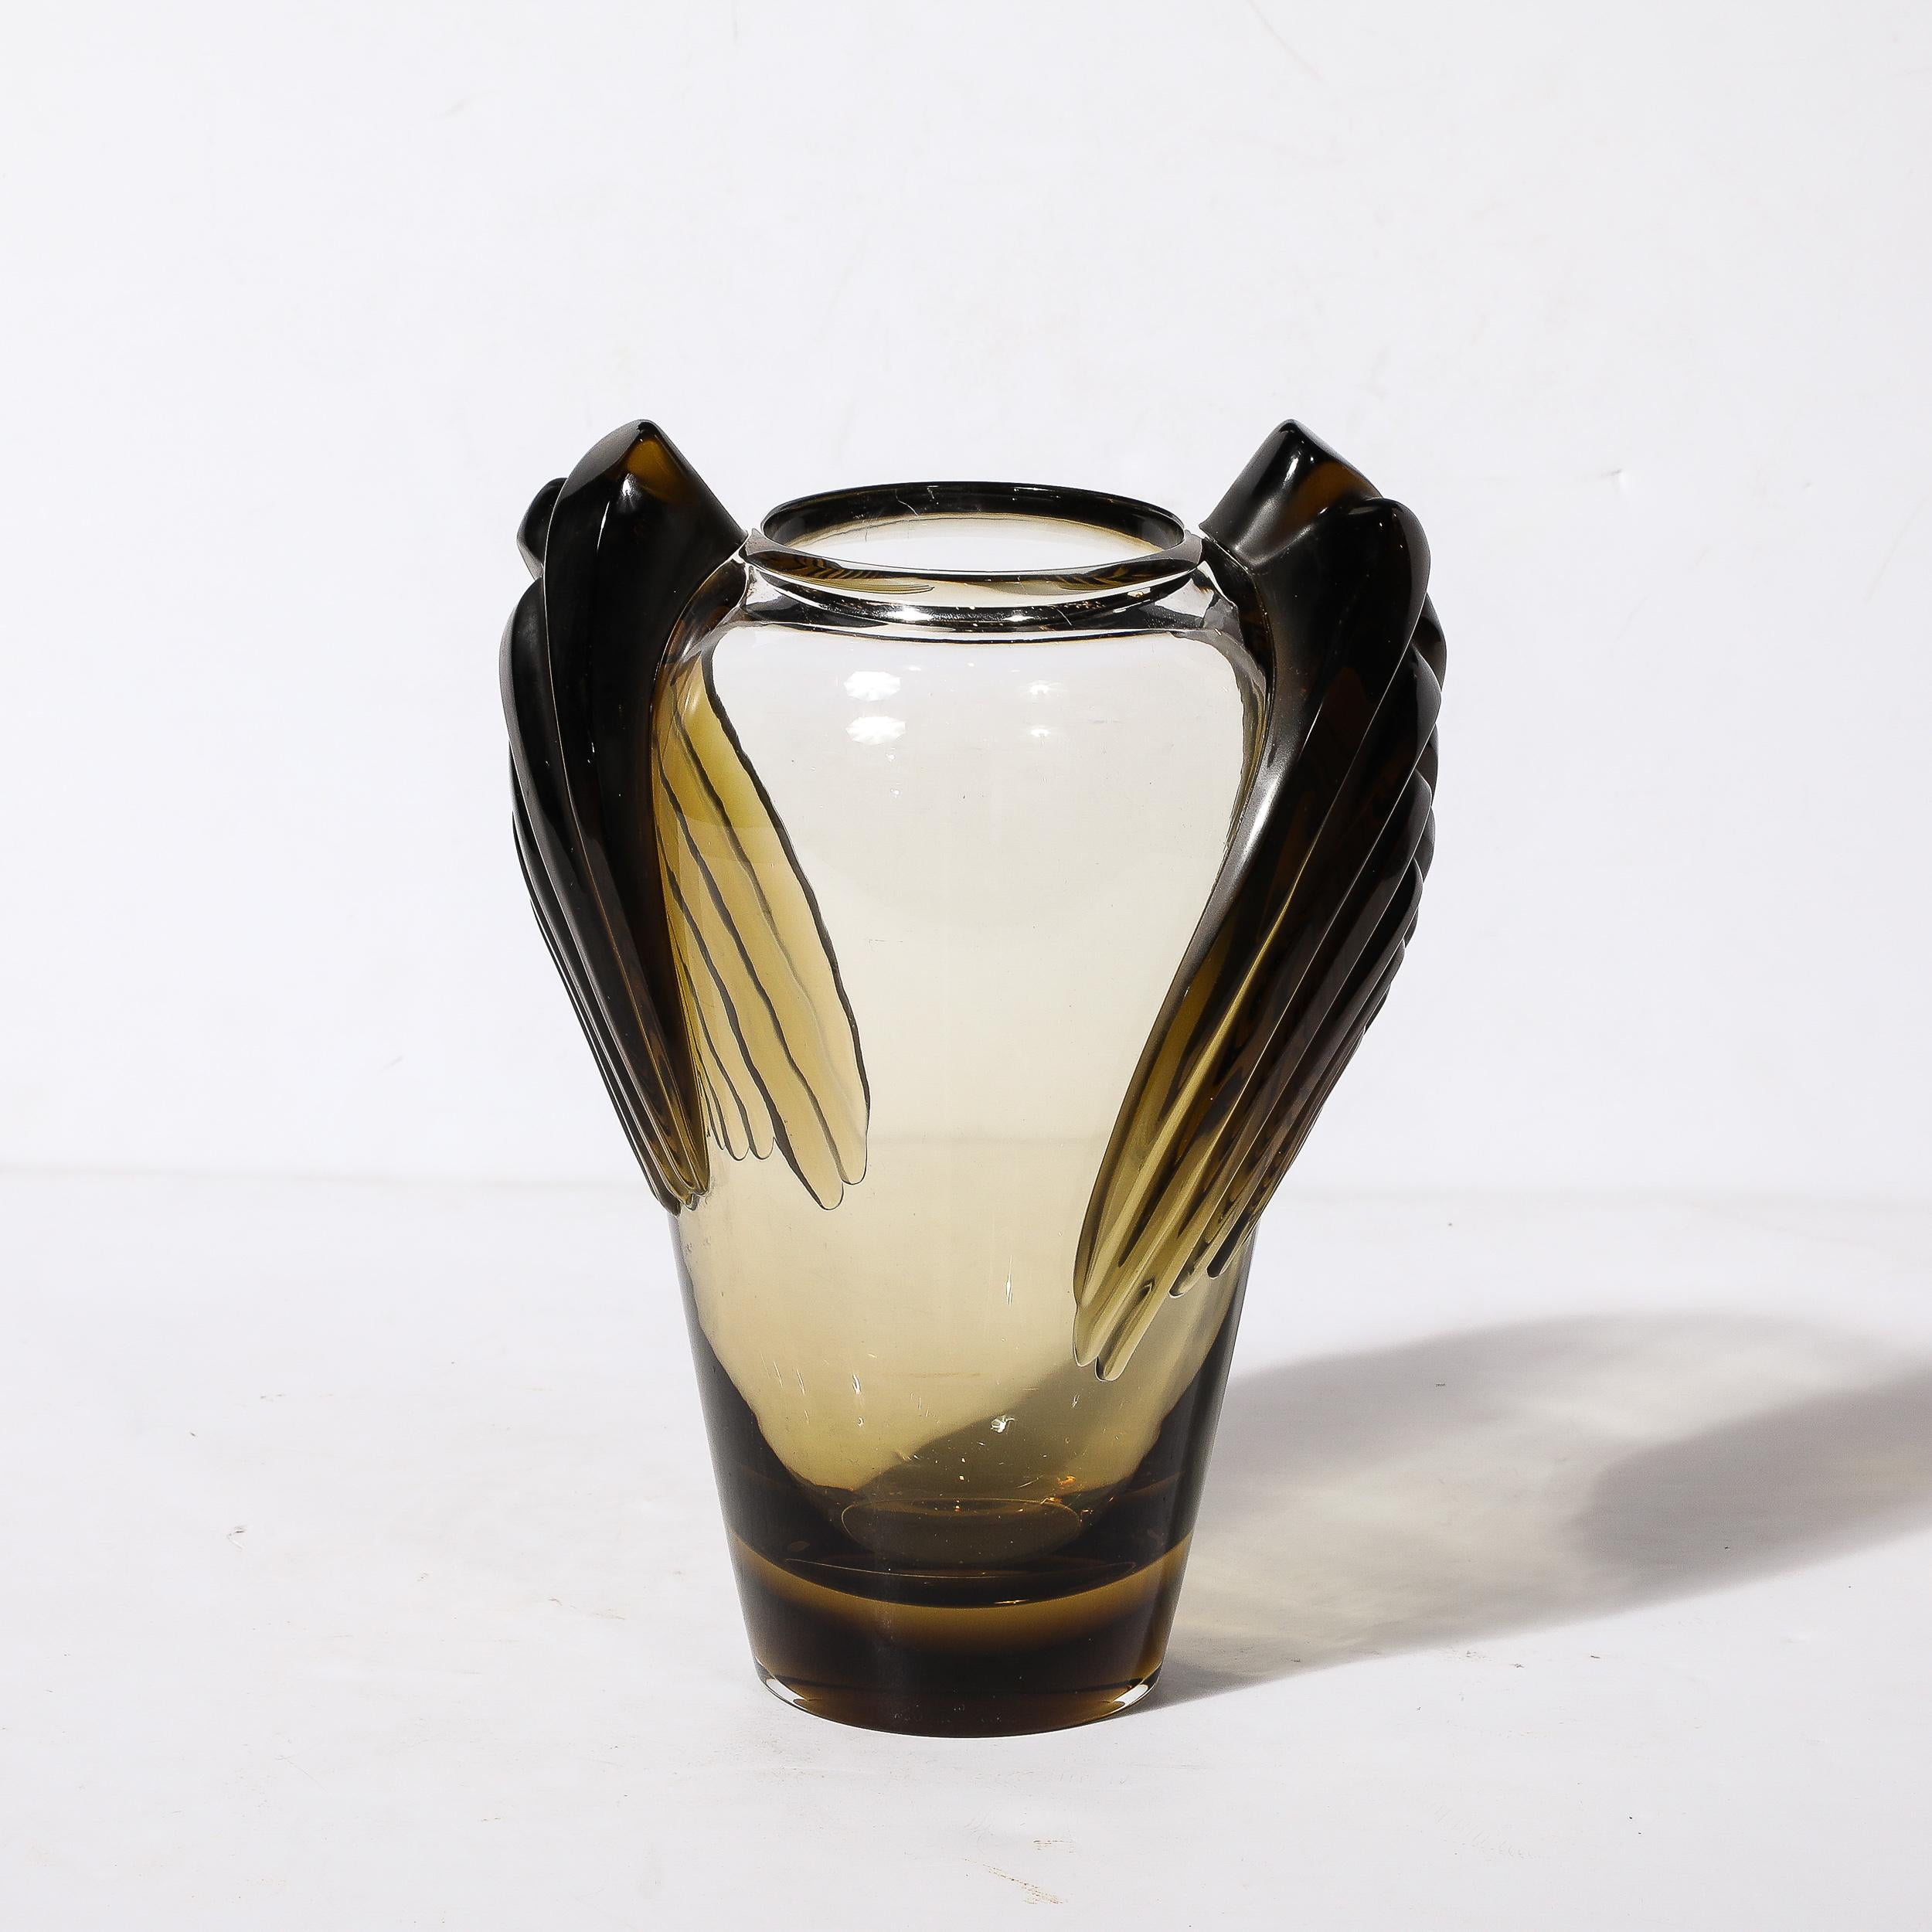 This stunning Art Deco Style Marrakech Vase is signed Lalique and originates from France, designed in 1978. This Art Deco inspired vase sports a teardrop form body with tiered and interlaced geometric wings to either side hugging the curvature and